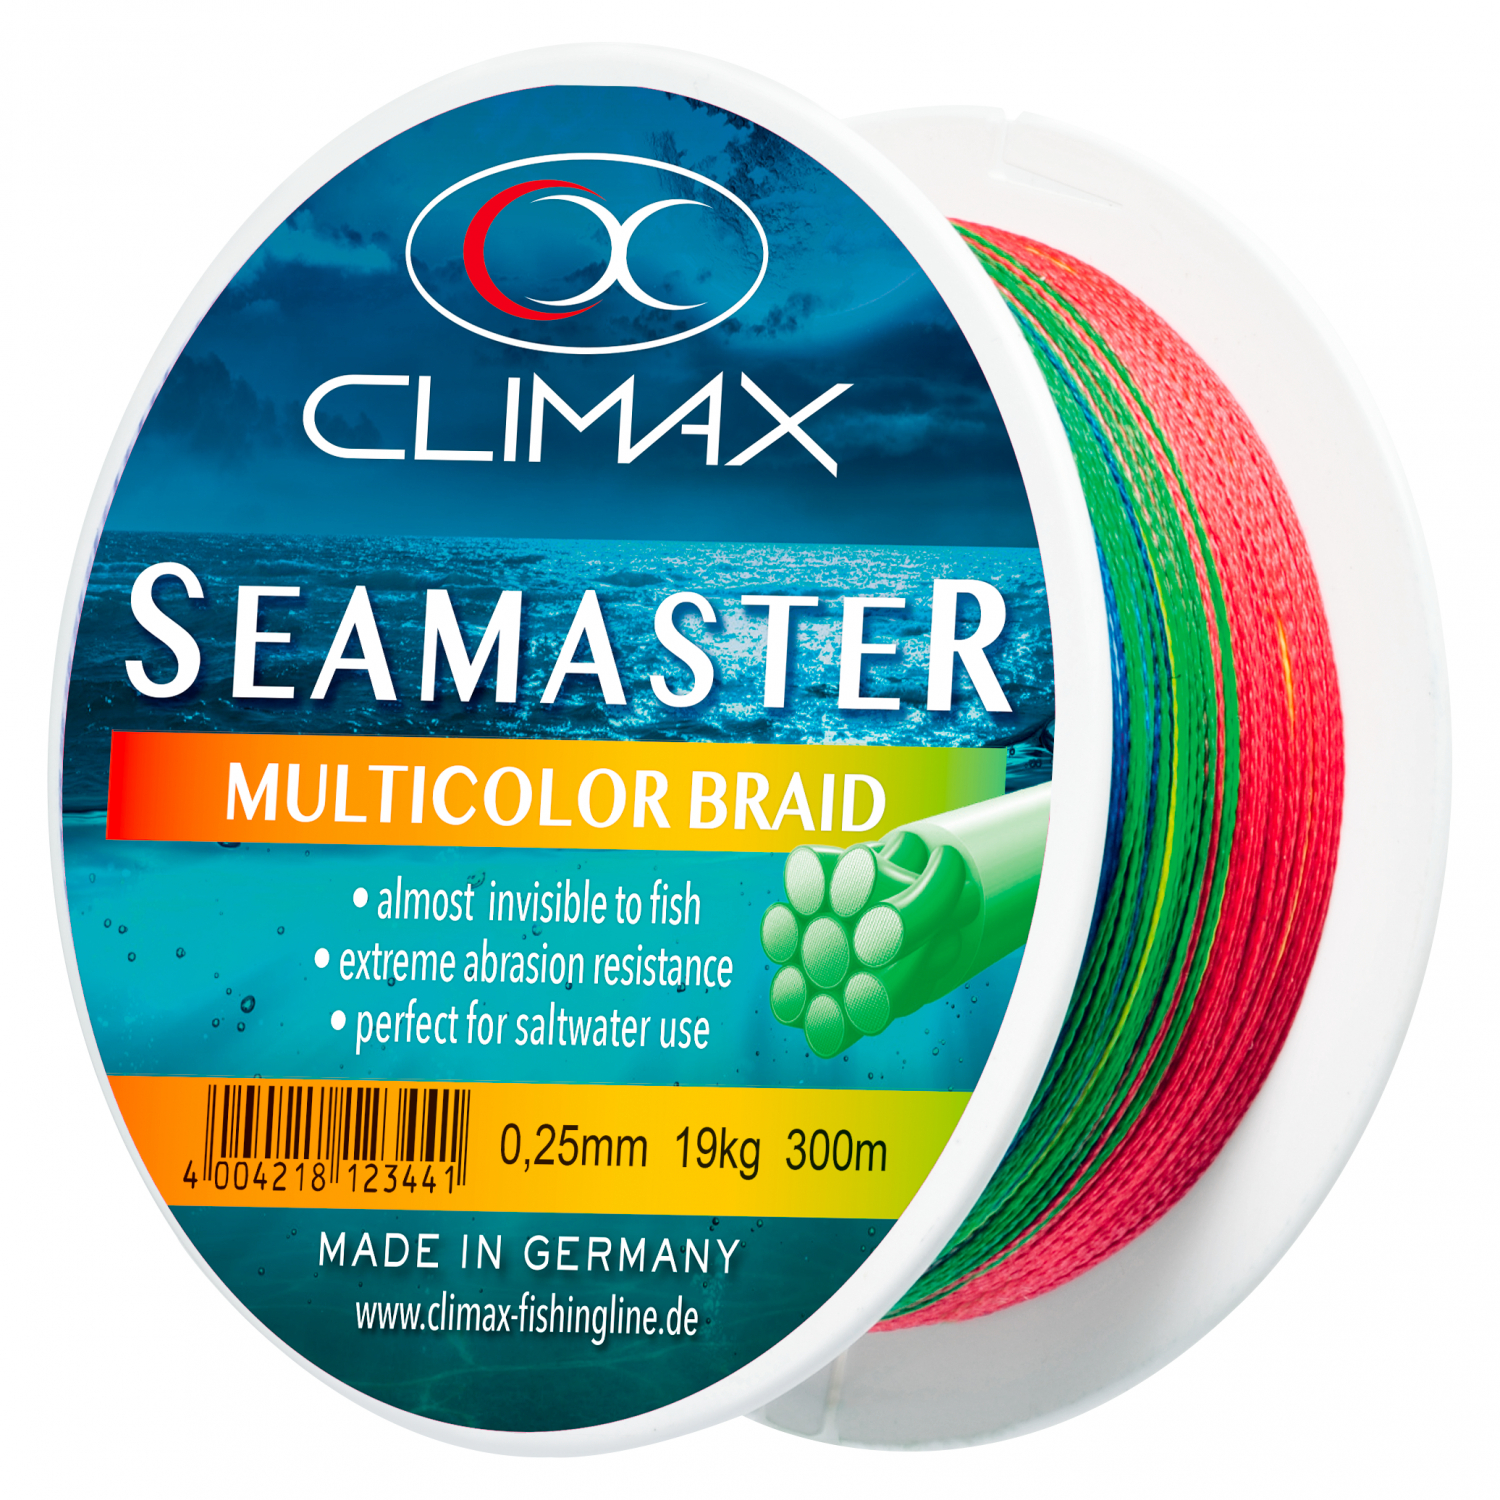 Climax Fishing Line Haruna Seamaster Braid (multicolor, 300 m) at low  prices